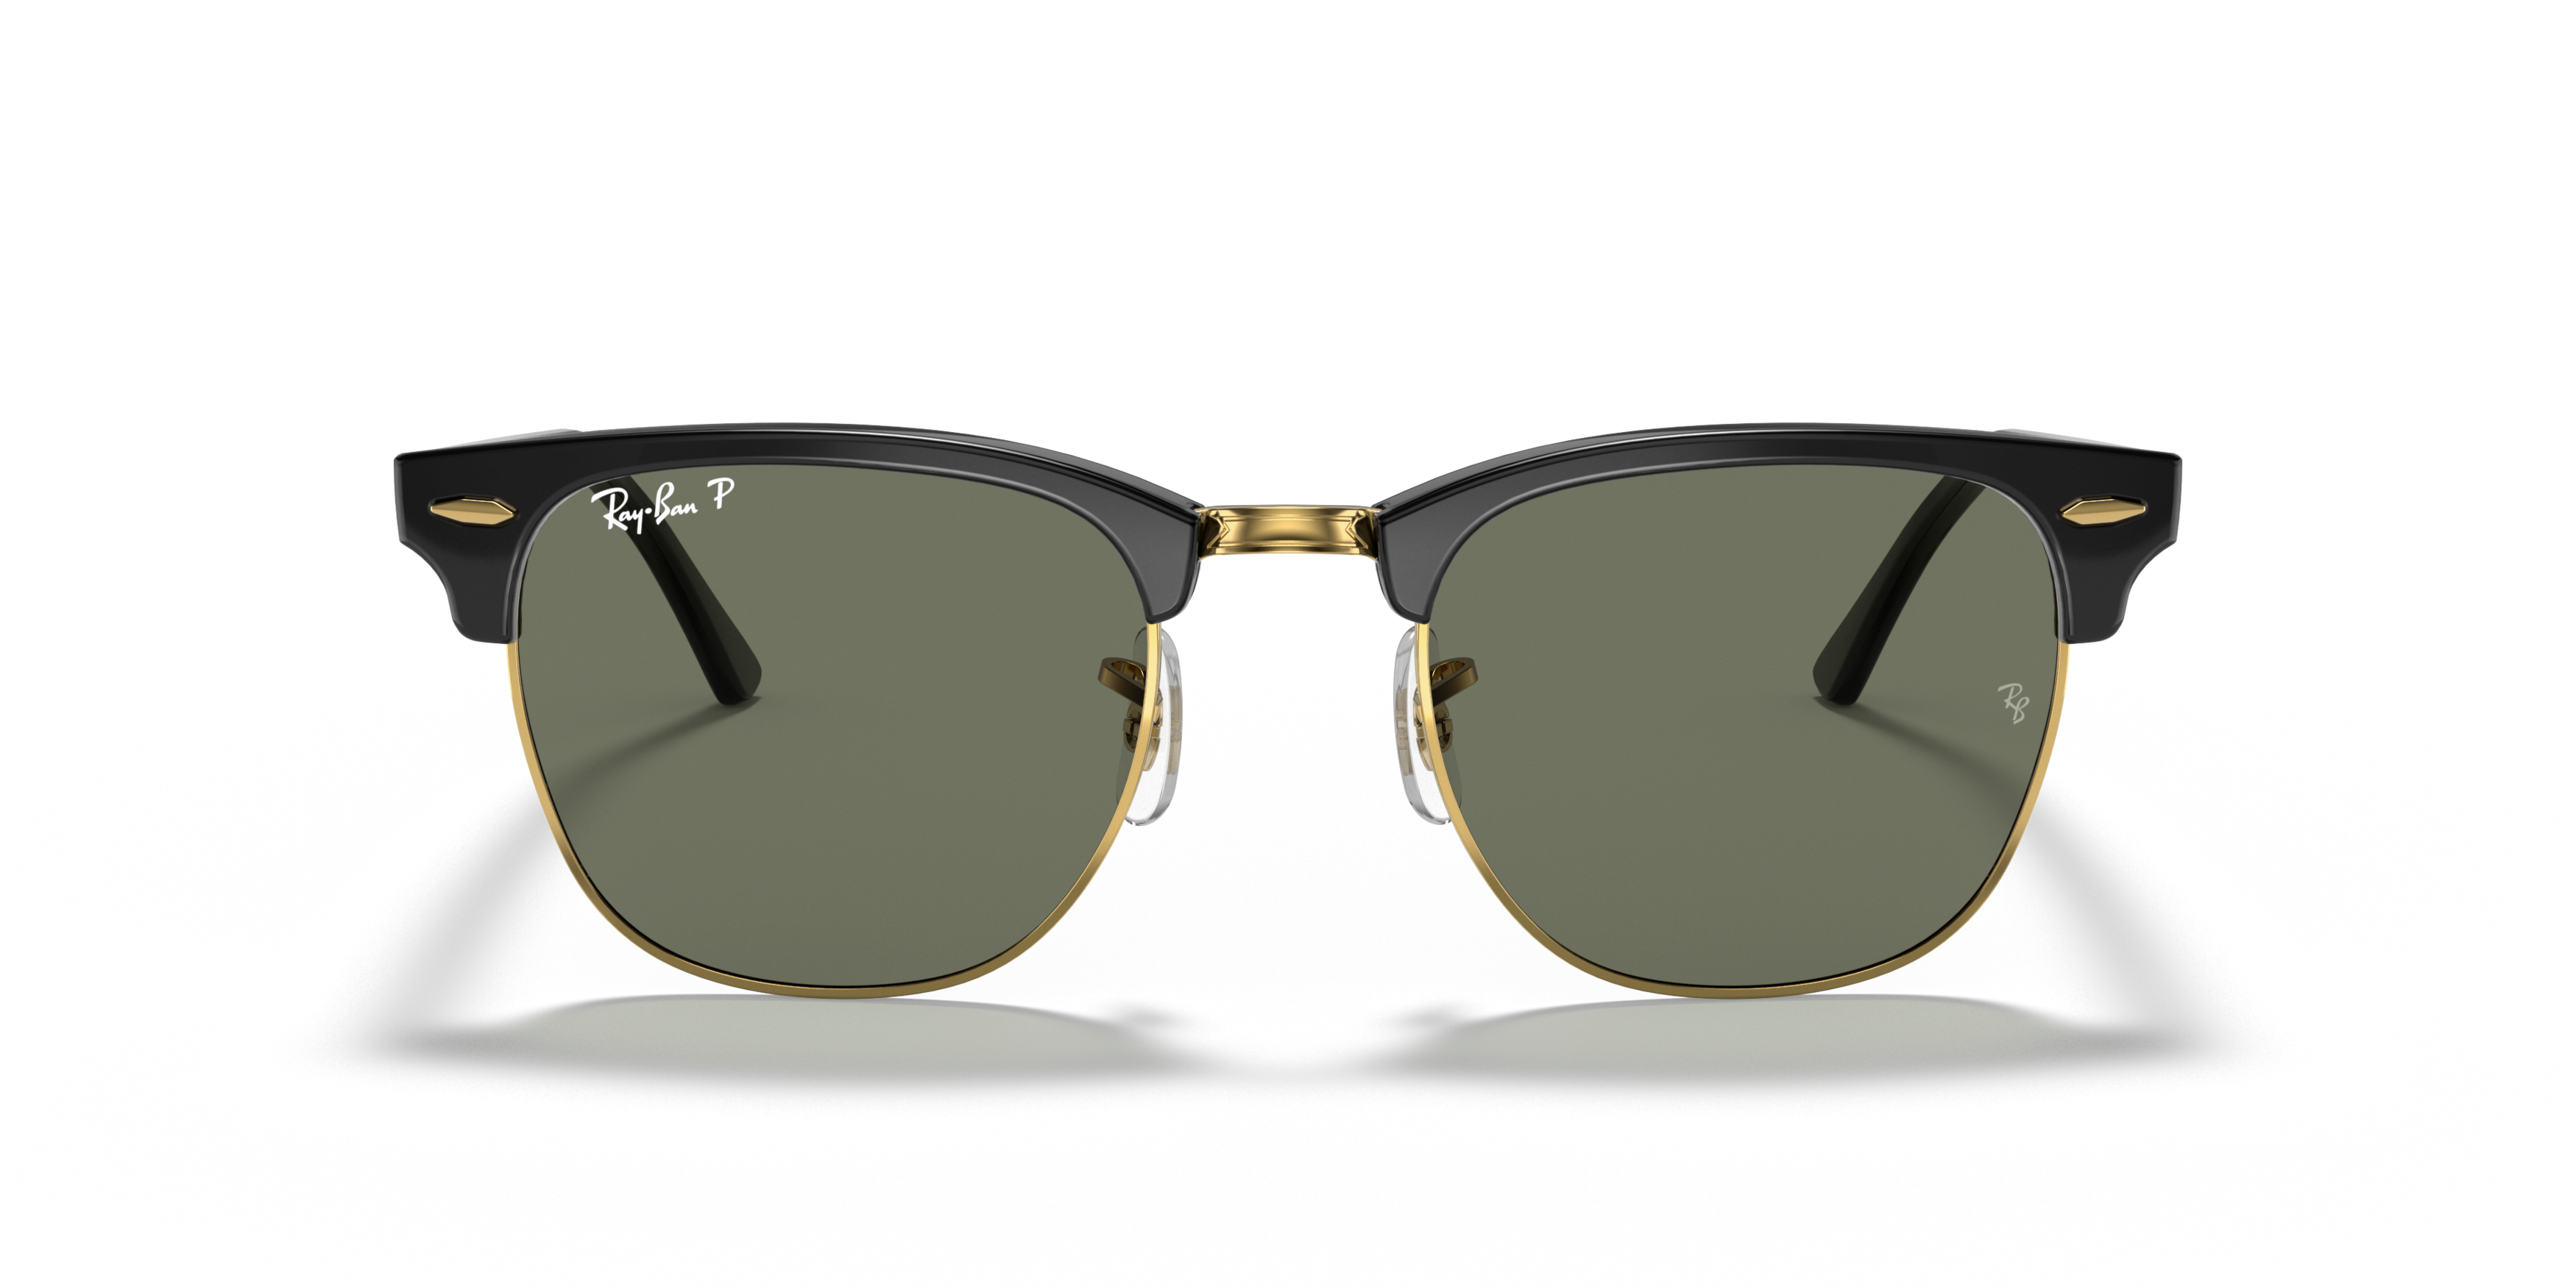 Front Ray-Ban RB 3016 (901/58) Sunglasses Green / Gold